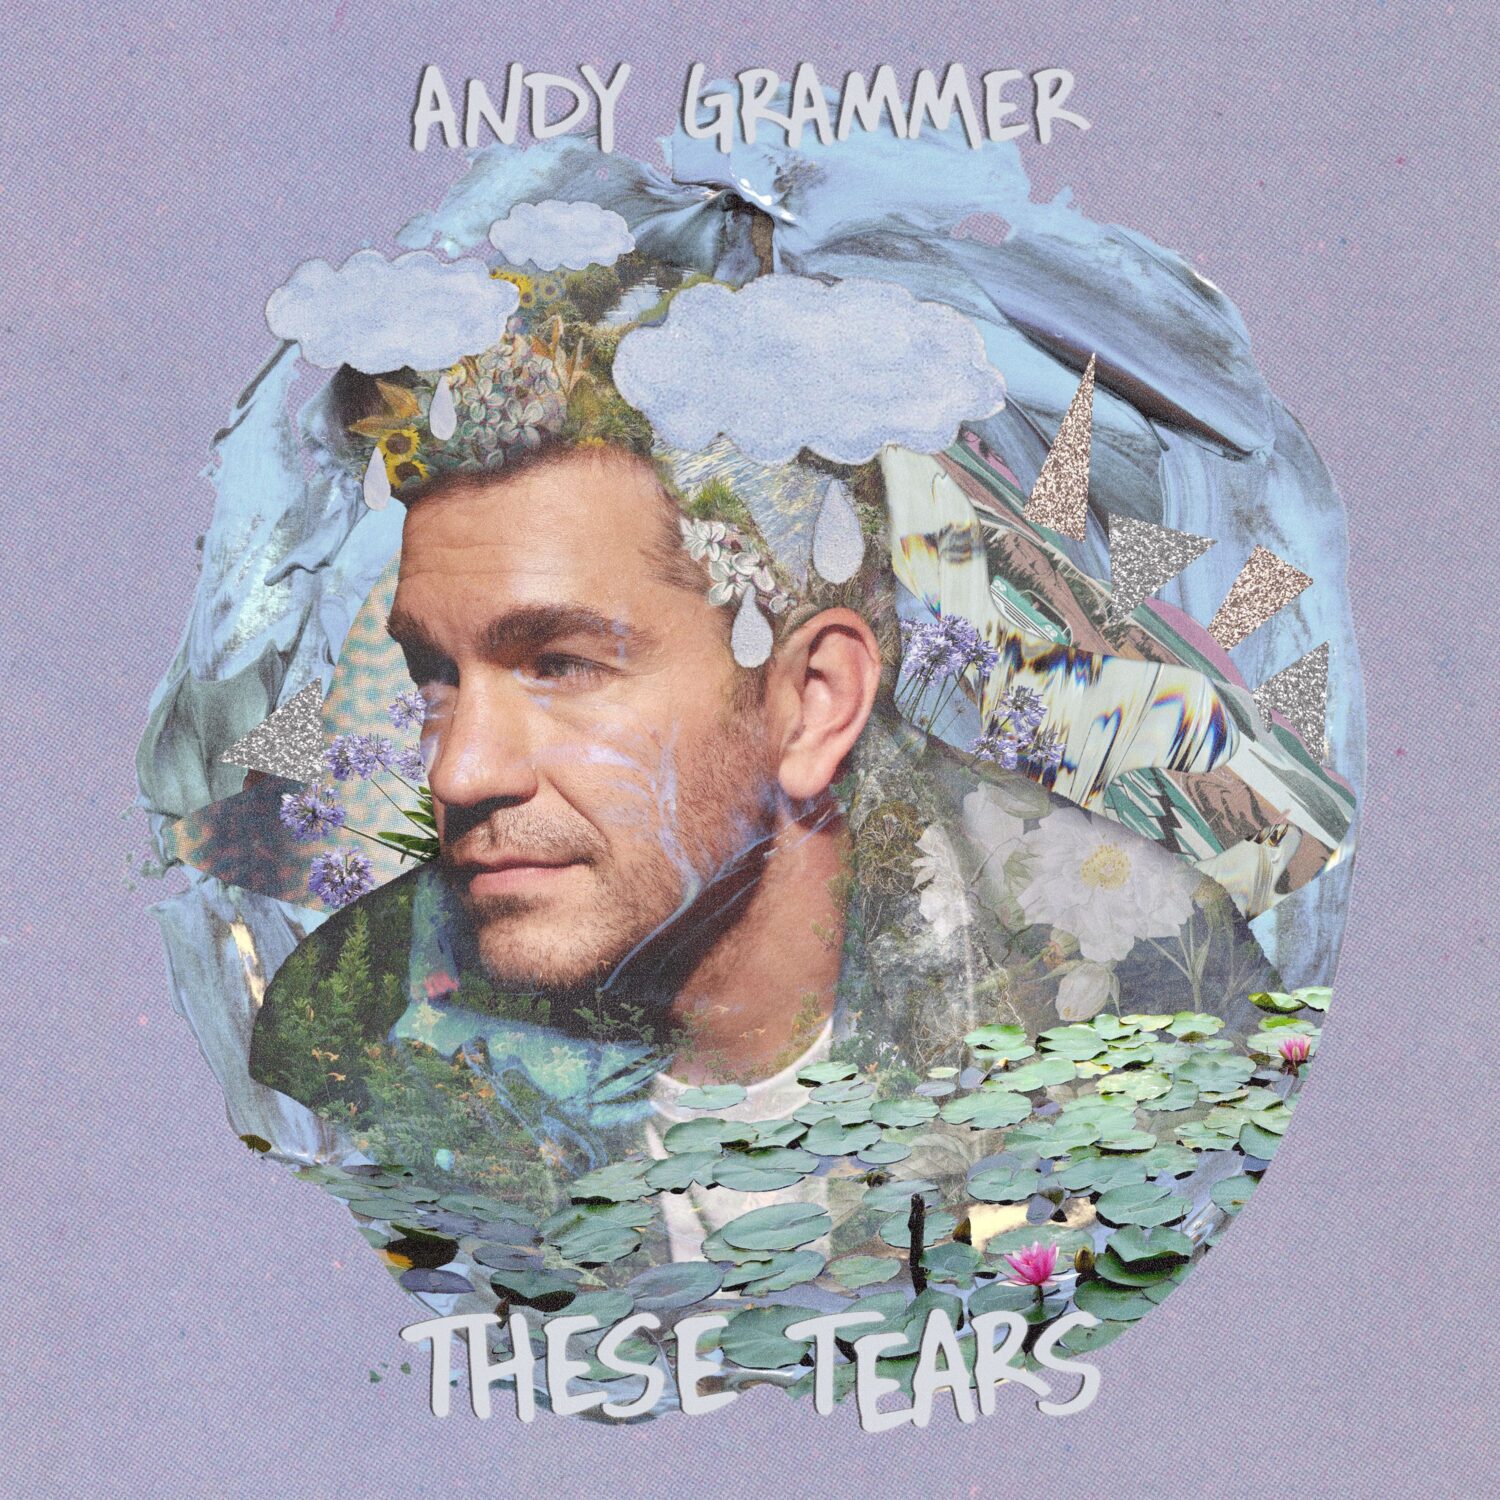 Andy Grammer: These Tears